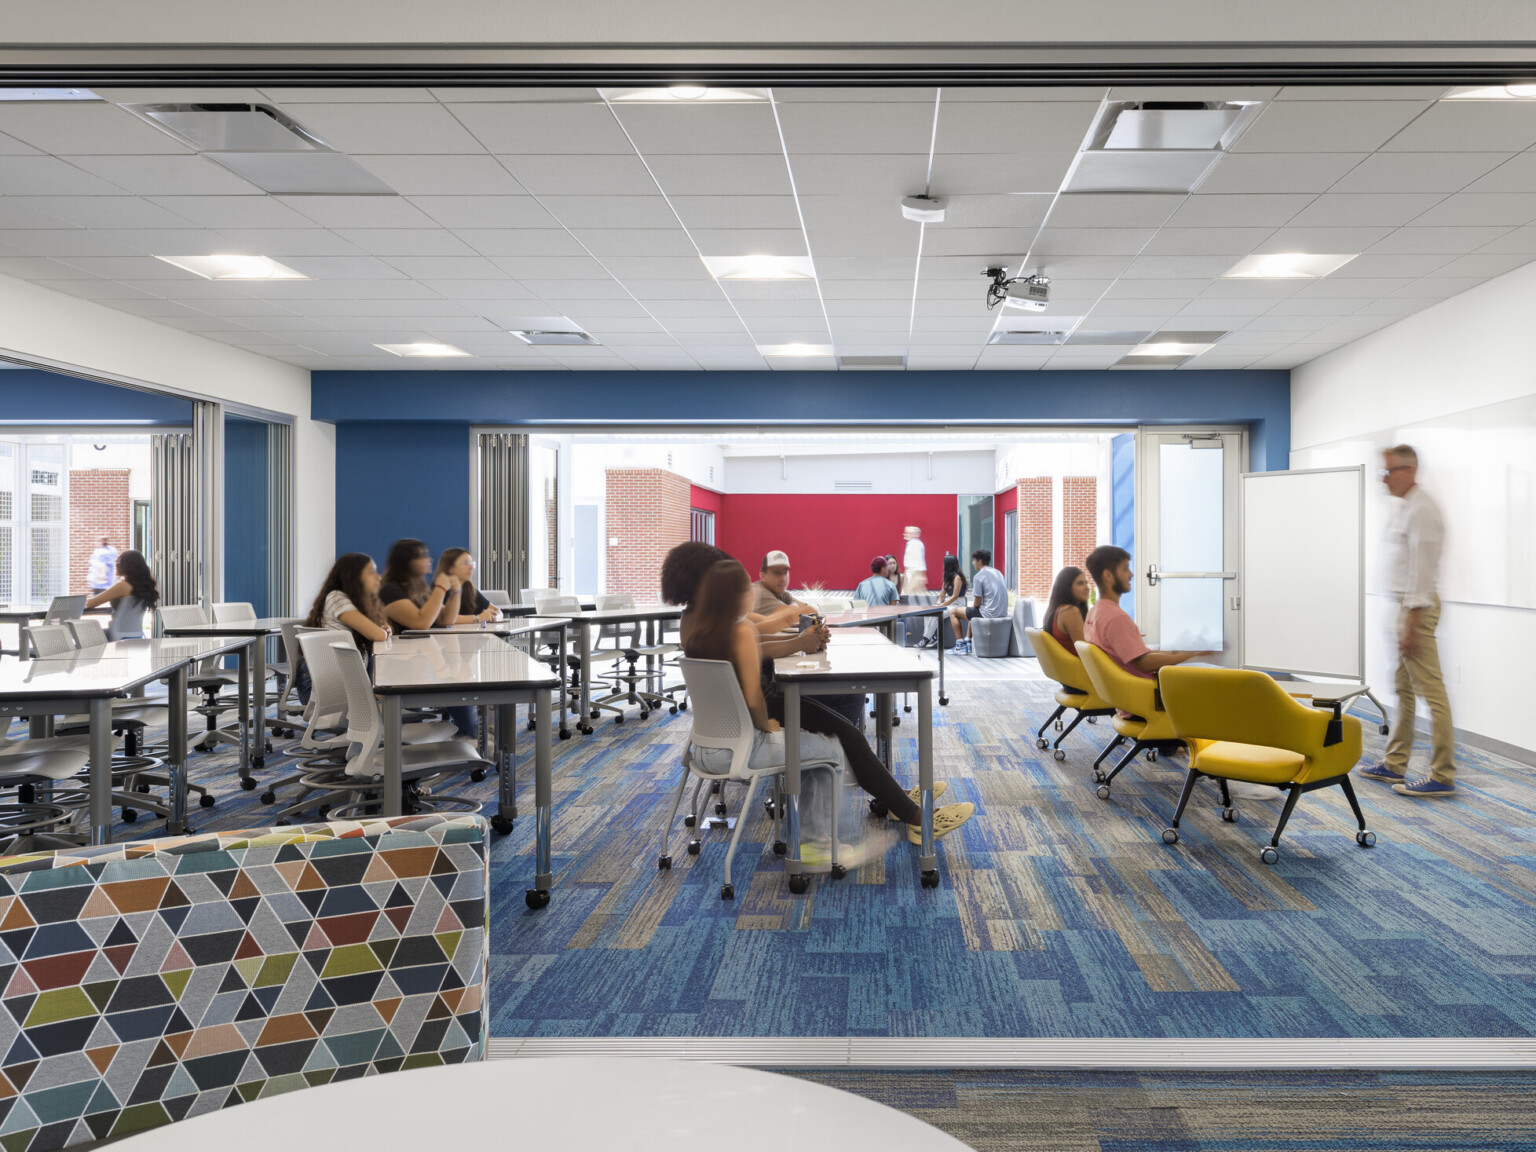 classroom with students in various seating areas, instructor, overhead edison pendant lights, blue geometric carpeting, blue accent wall, glass partition between two classrooms invite collaboration